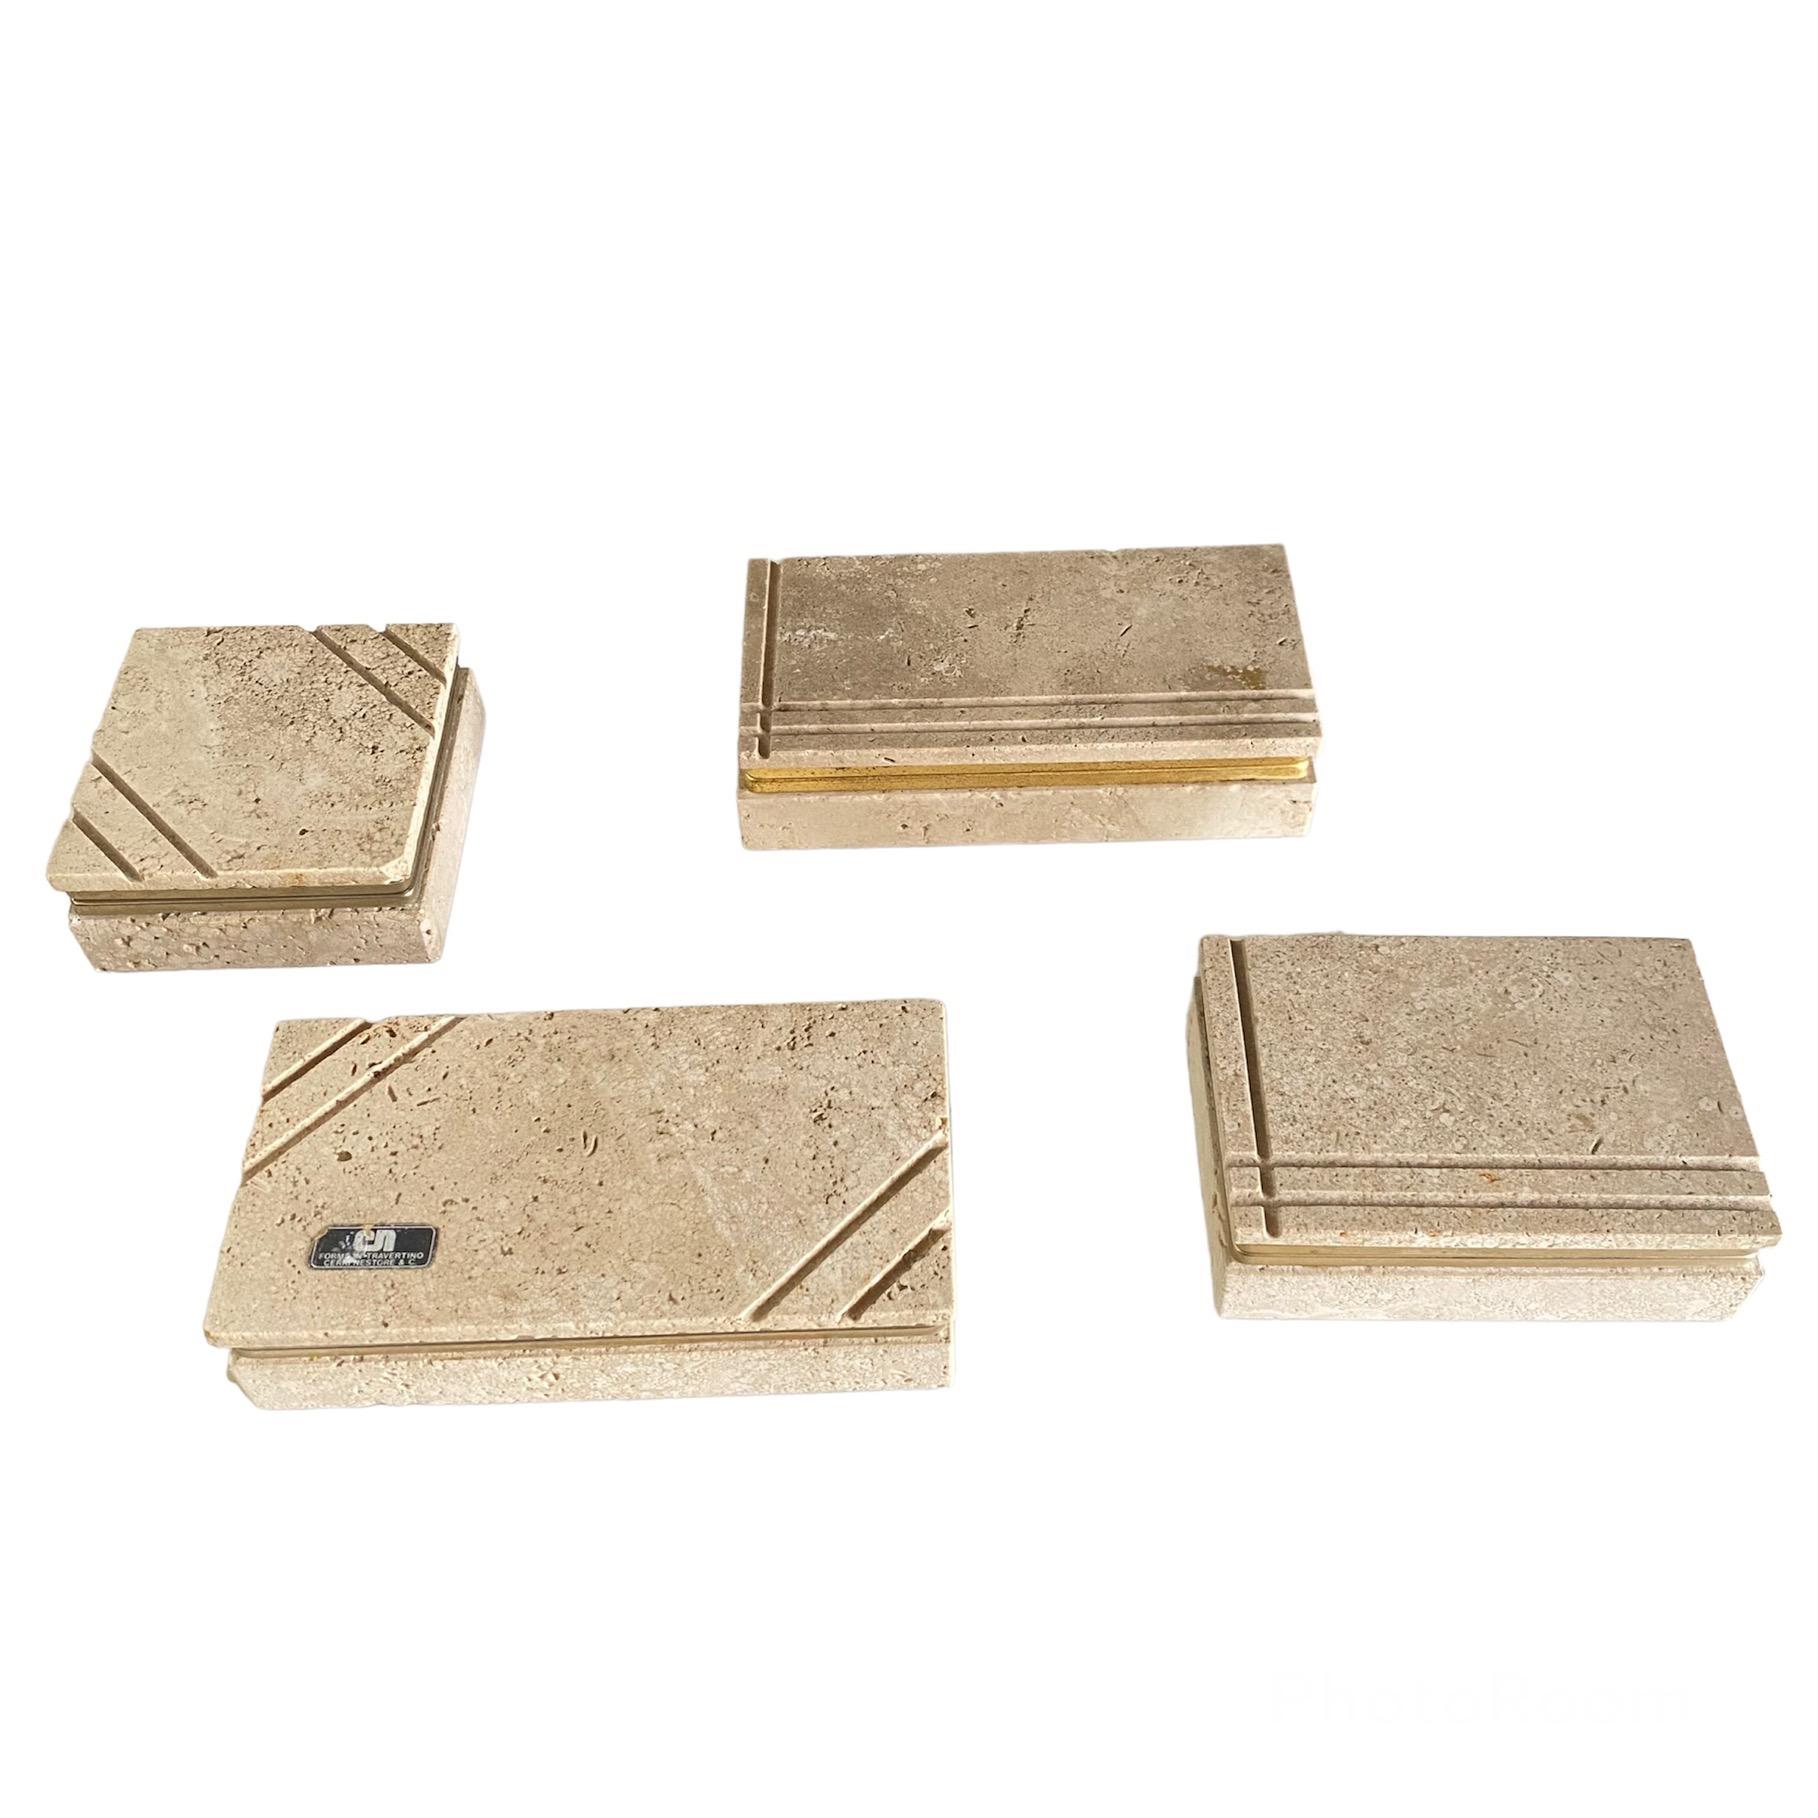 Travertine Decorative Boxes by Cerri Nestore, Italy 1970

Elegant set of 4 Decorative boxes in Travertine, made in Italy.
Perfect Vintage conditions.